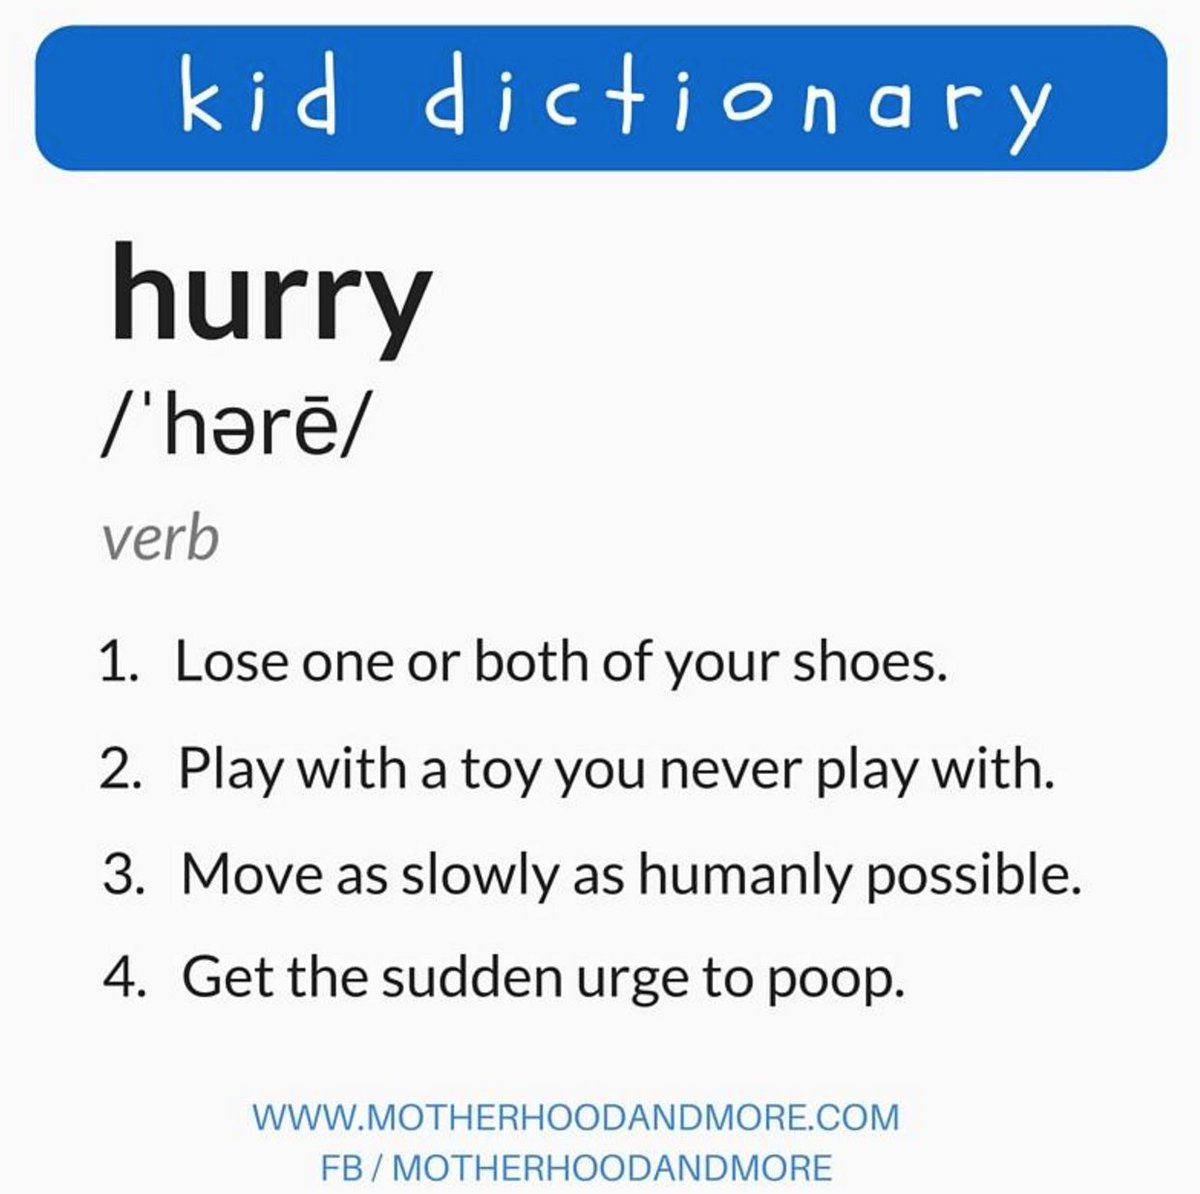 Have you ever seen a child actually hurry? Not sure why we use that word at all.